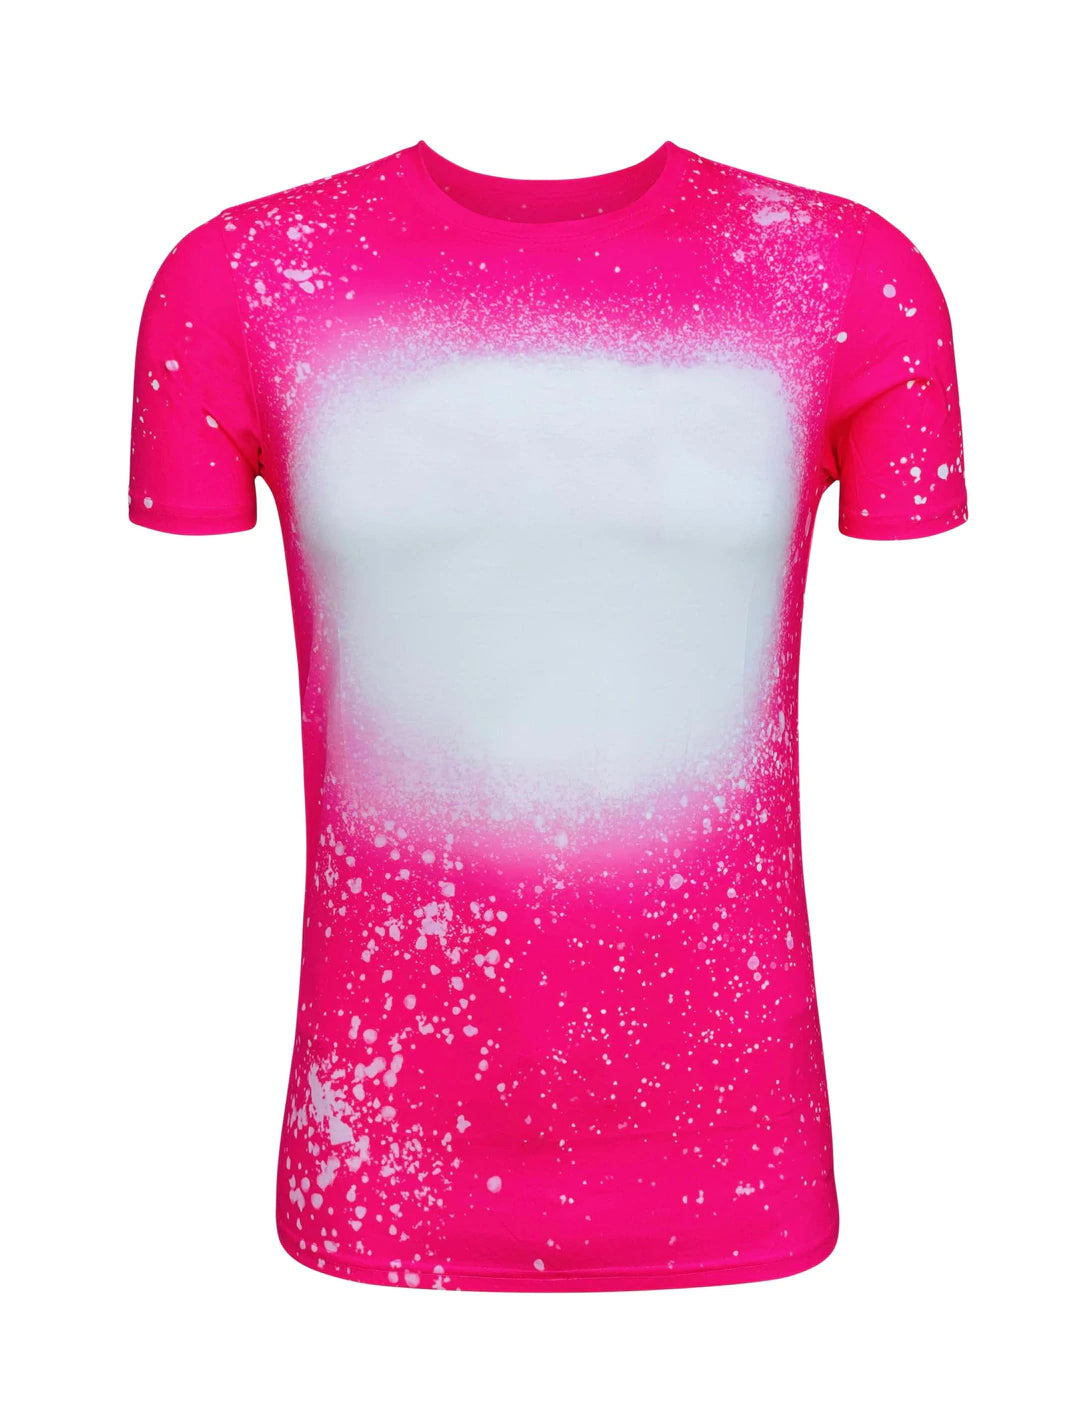 Unisex Faux Bleached Shirts Ready For Sublimation Or Screen Transfer 0560